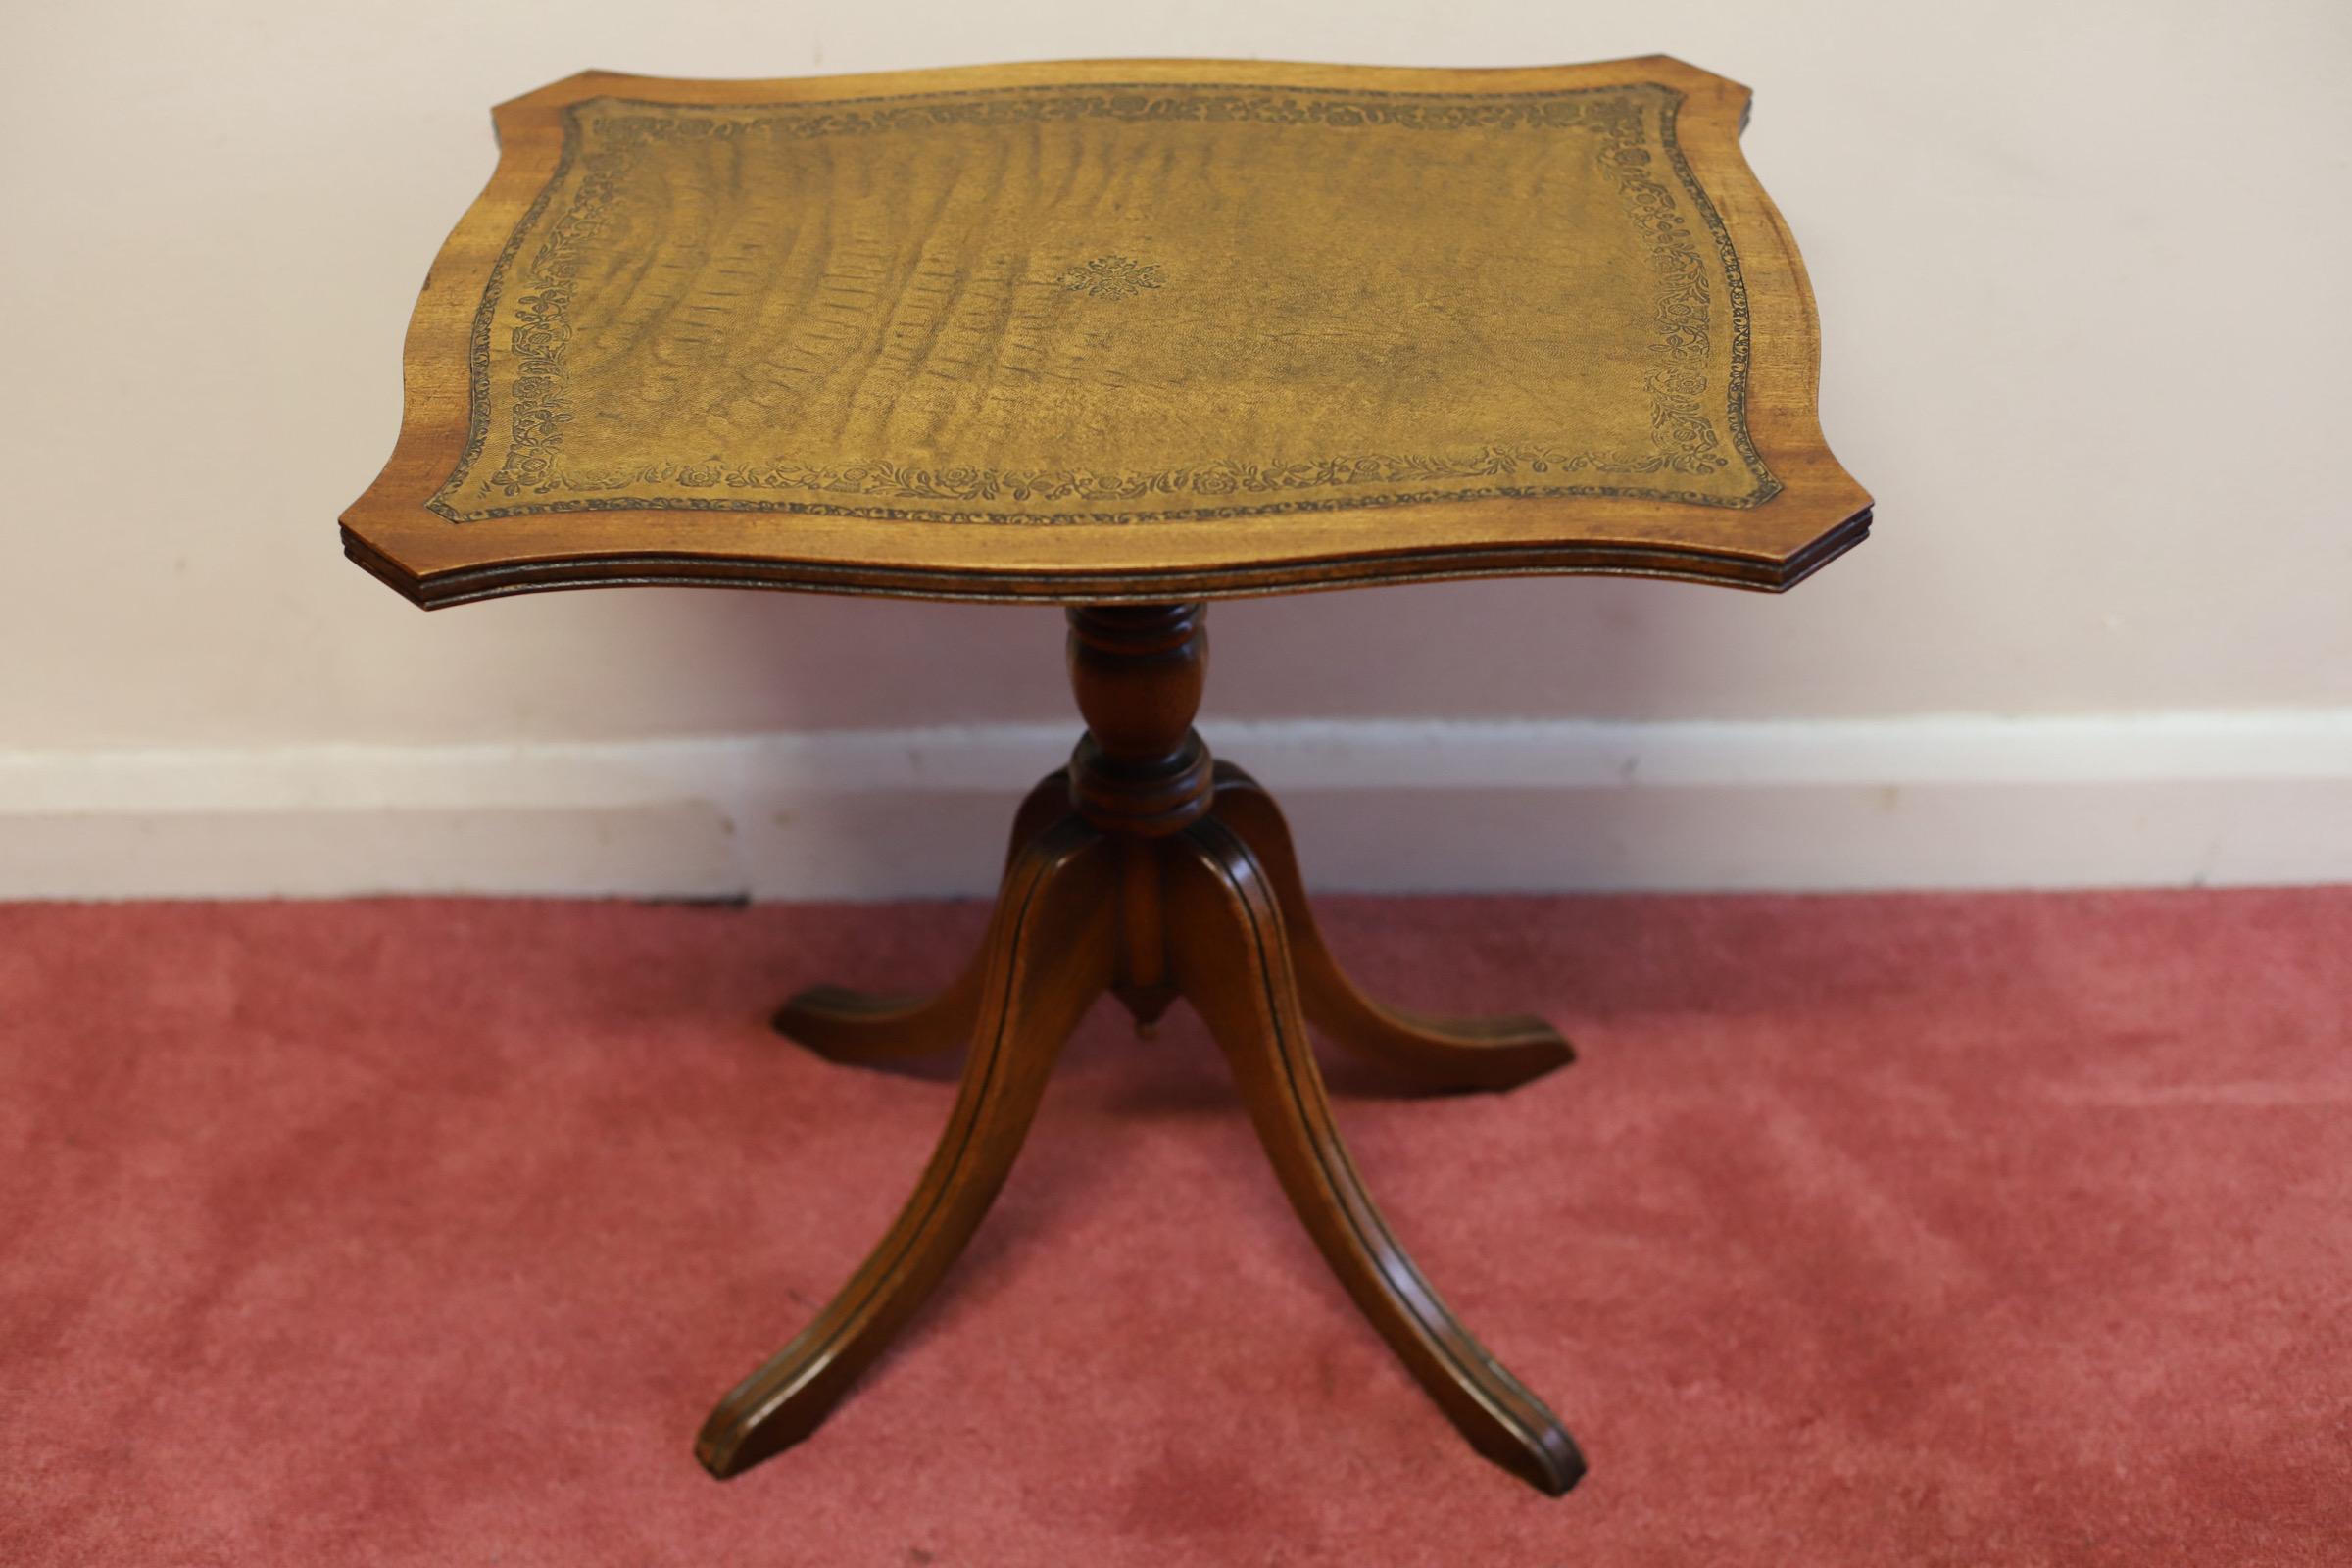 We delight to offer for sale this lovely Bevan Funnel Reprodux Occasional table made by beautiful mahogany wood and green leather top , in good condition , circa 1970.
Don't hesitate to contact me if you have any questions.
Please have a closer look